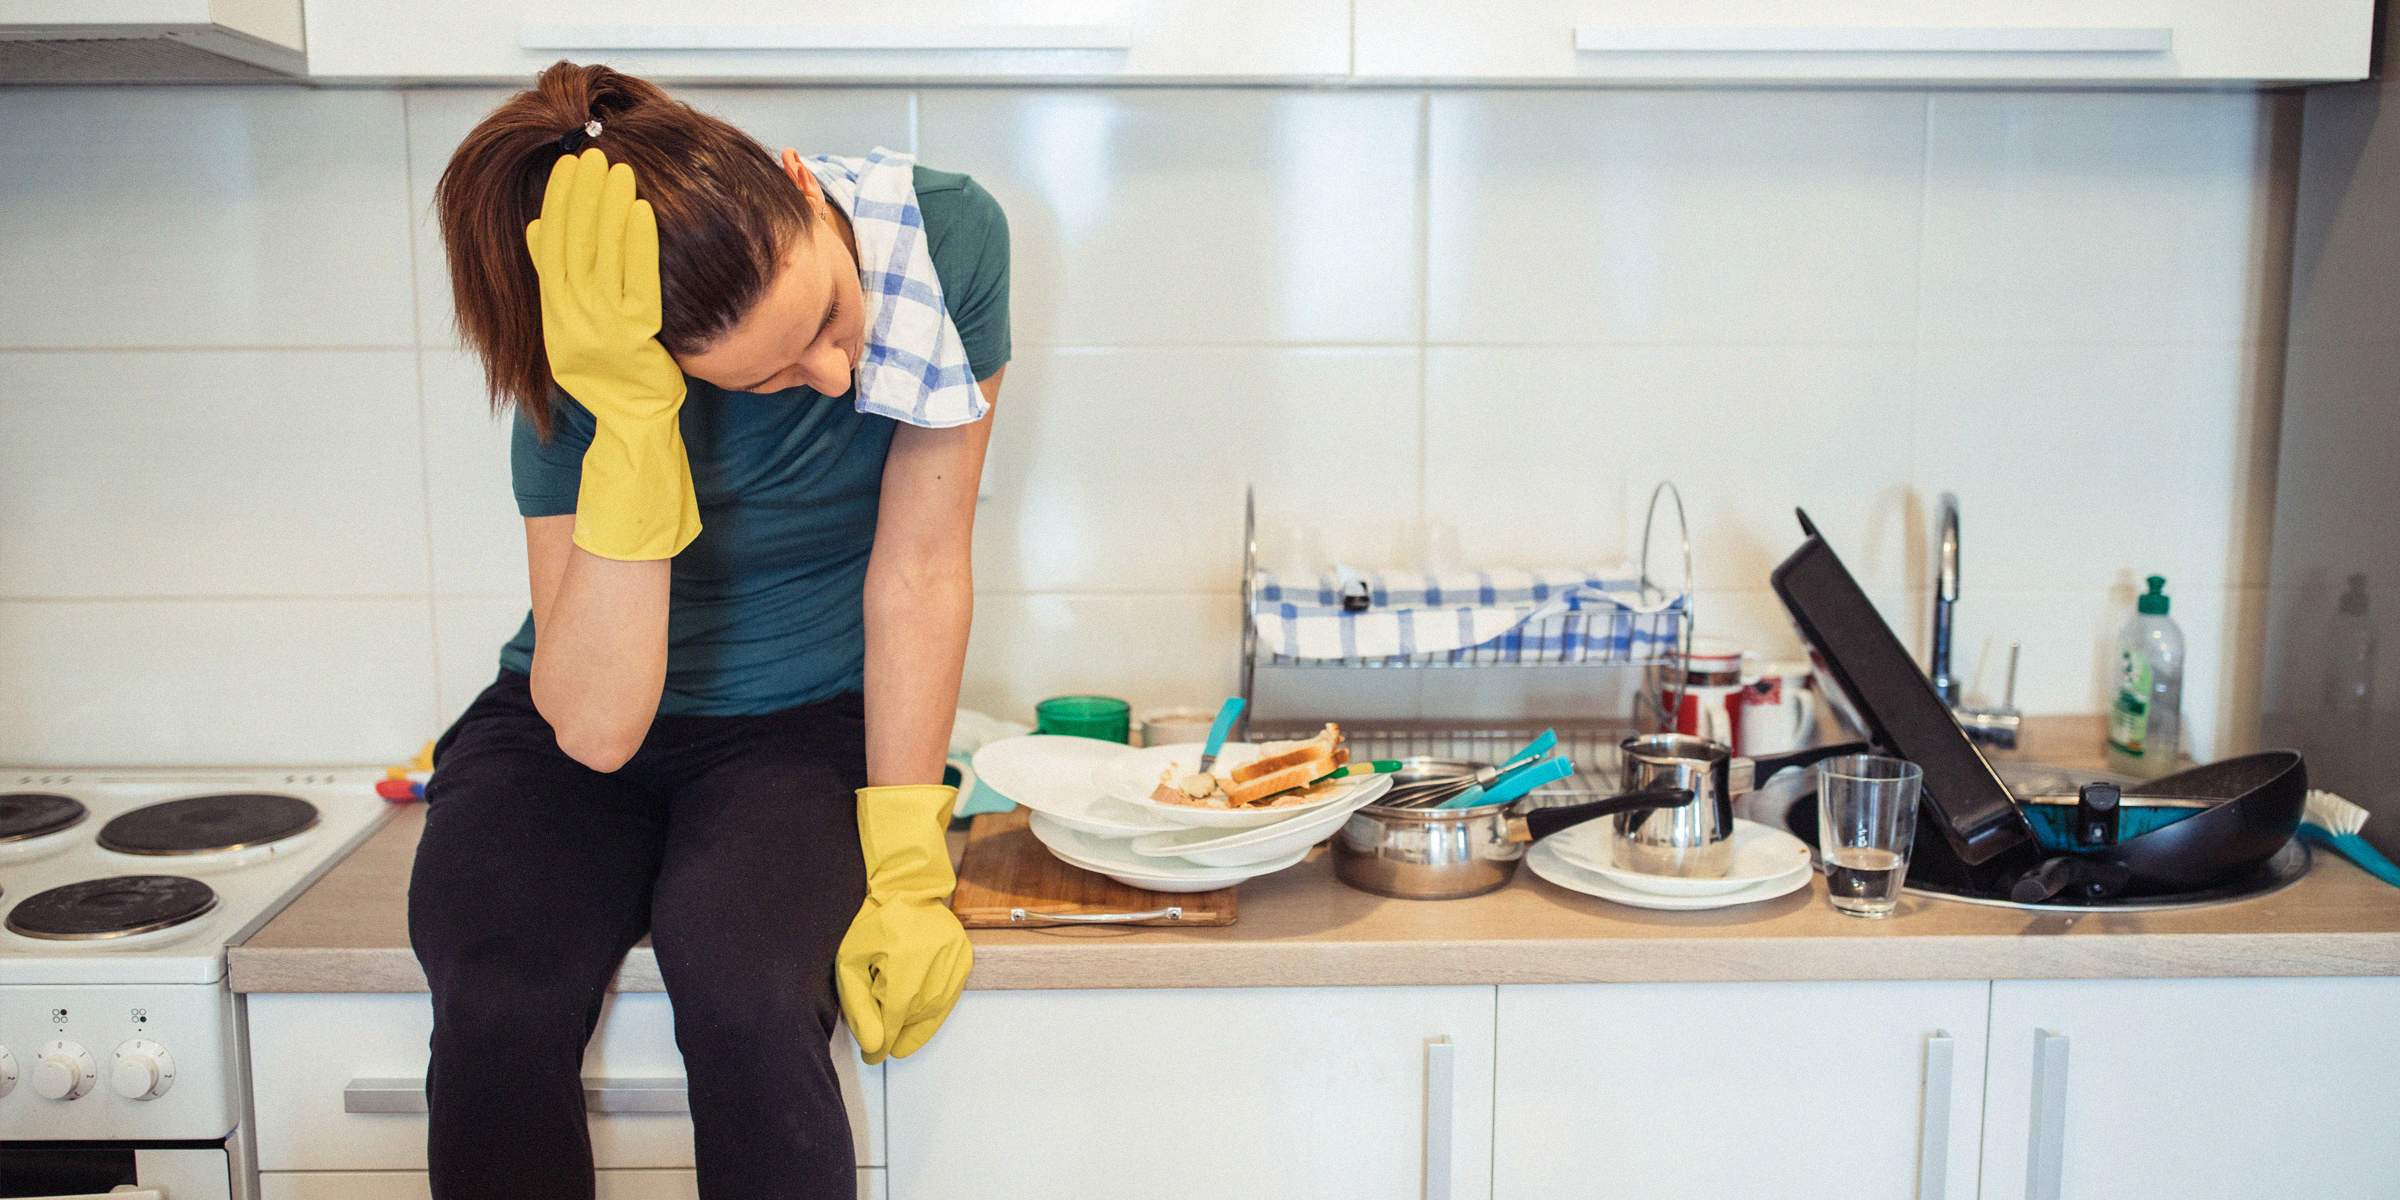 A tired mom next to a kitchen sink full of dishes | Source: Getty Images